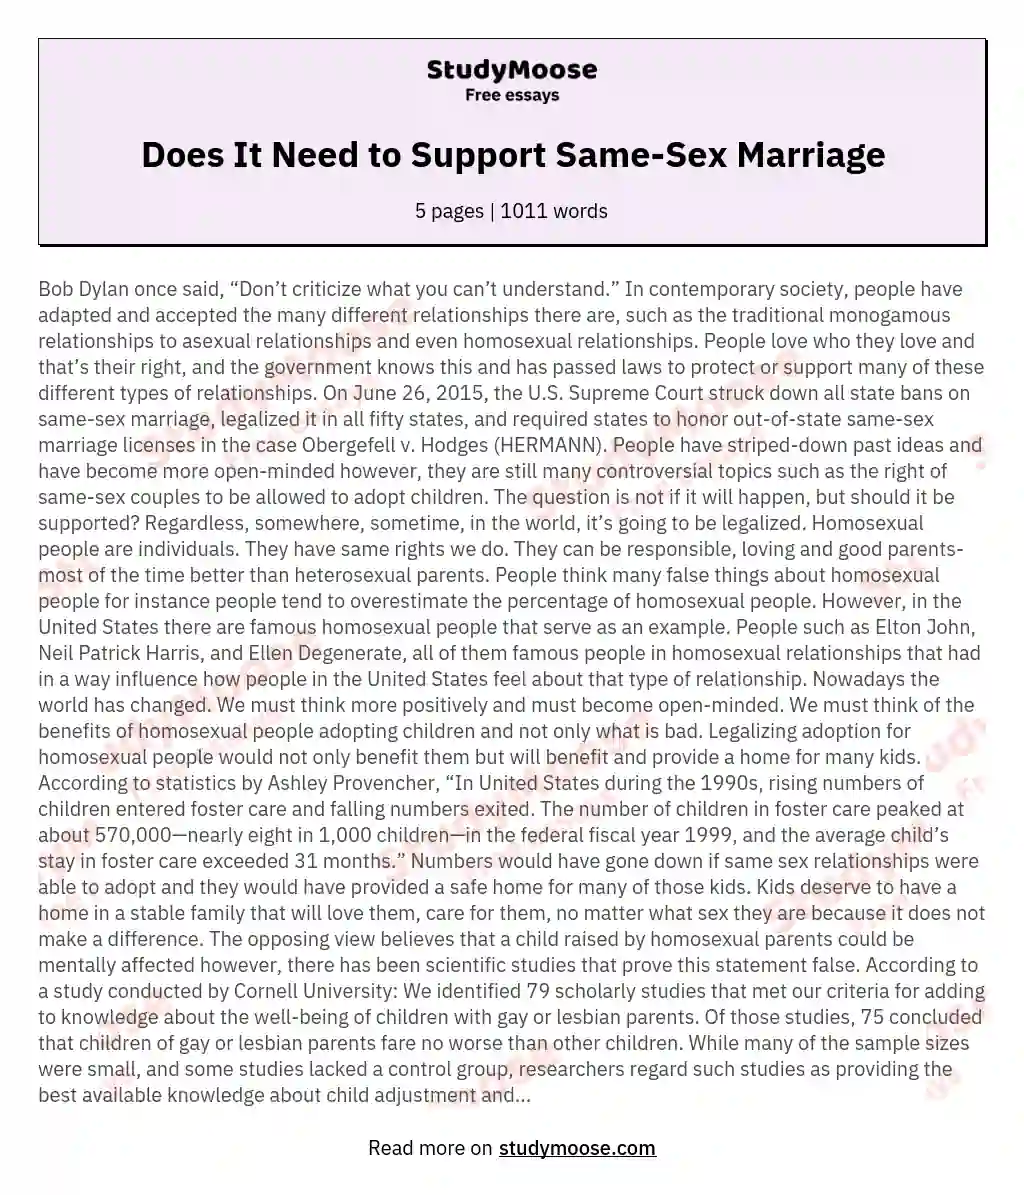 Does It Need to Support Same-Sex Marriage essay